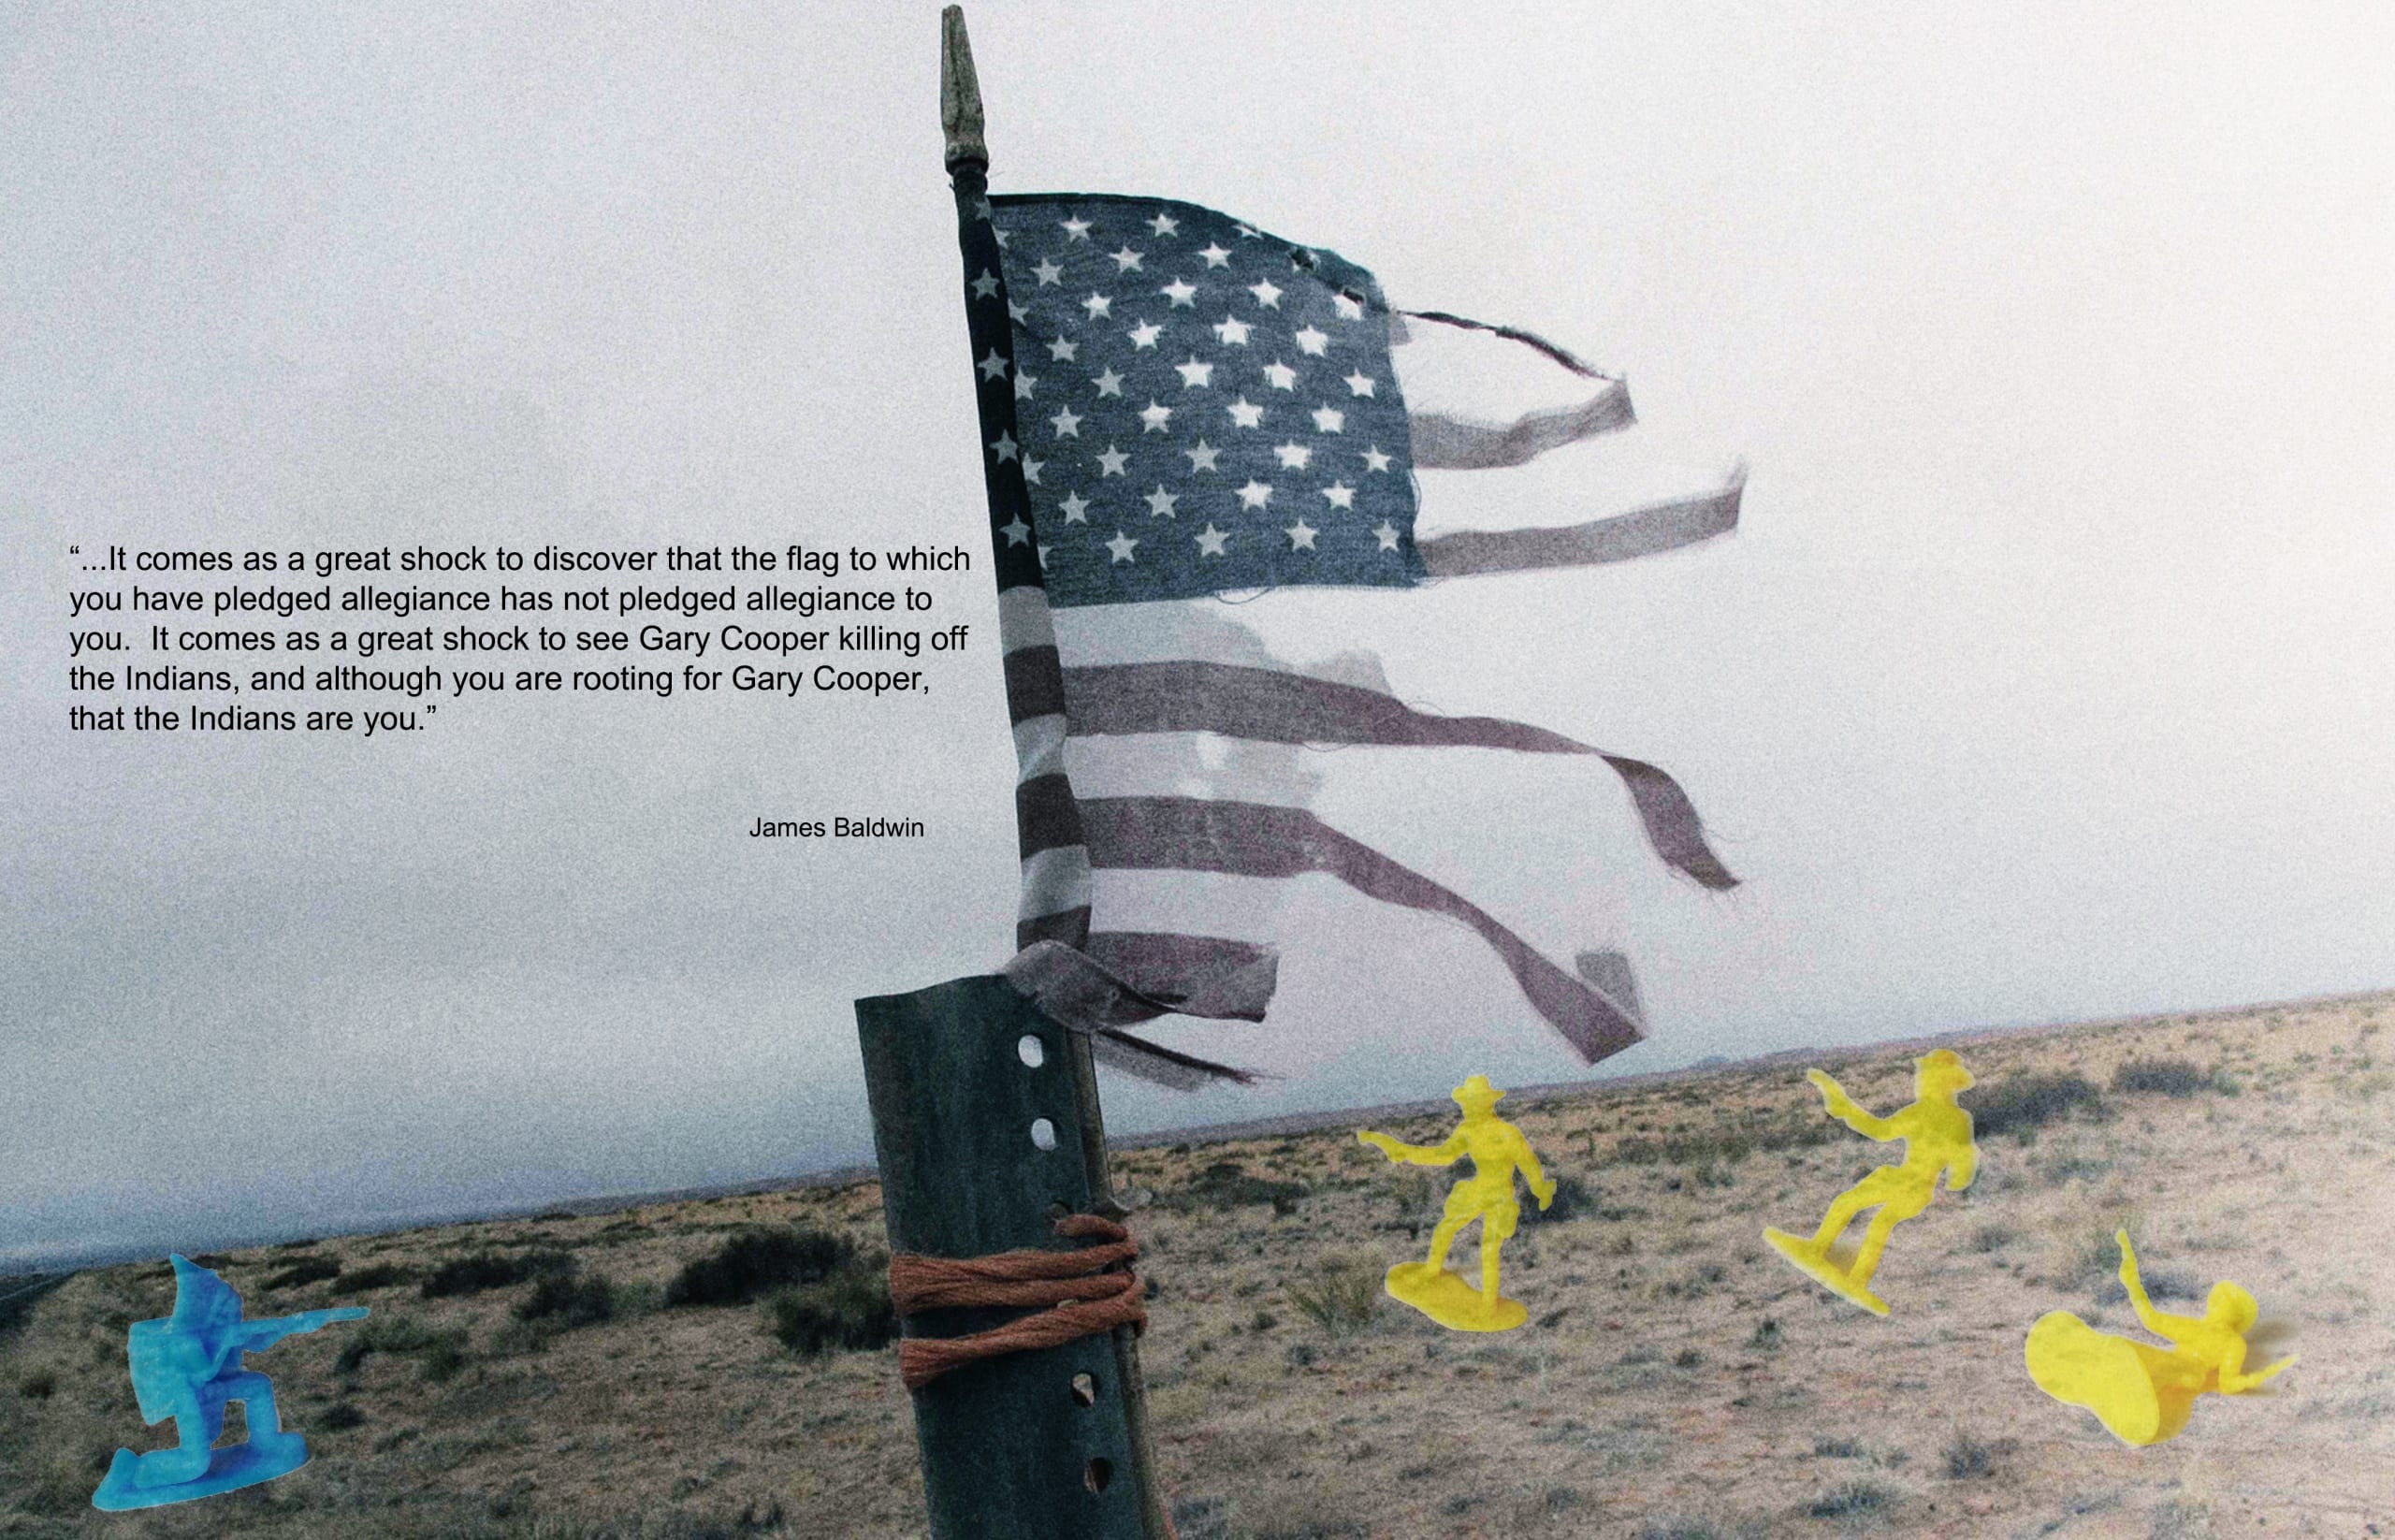 Photo of tattered American flag secured to a post in a rural landscape; small children's toys meant to depict "Cowboys and Indians" are superimposed over the bottom third of the image. A quote from James Baldwin appears directly over the photograph